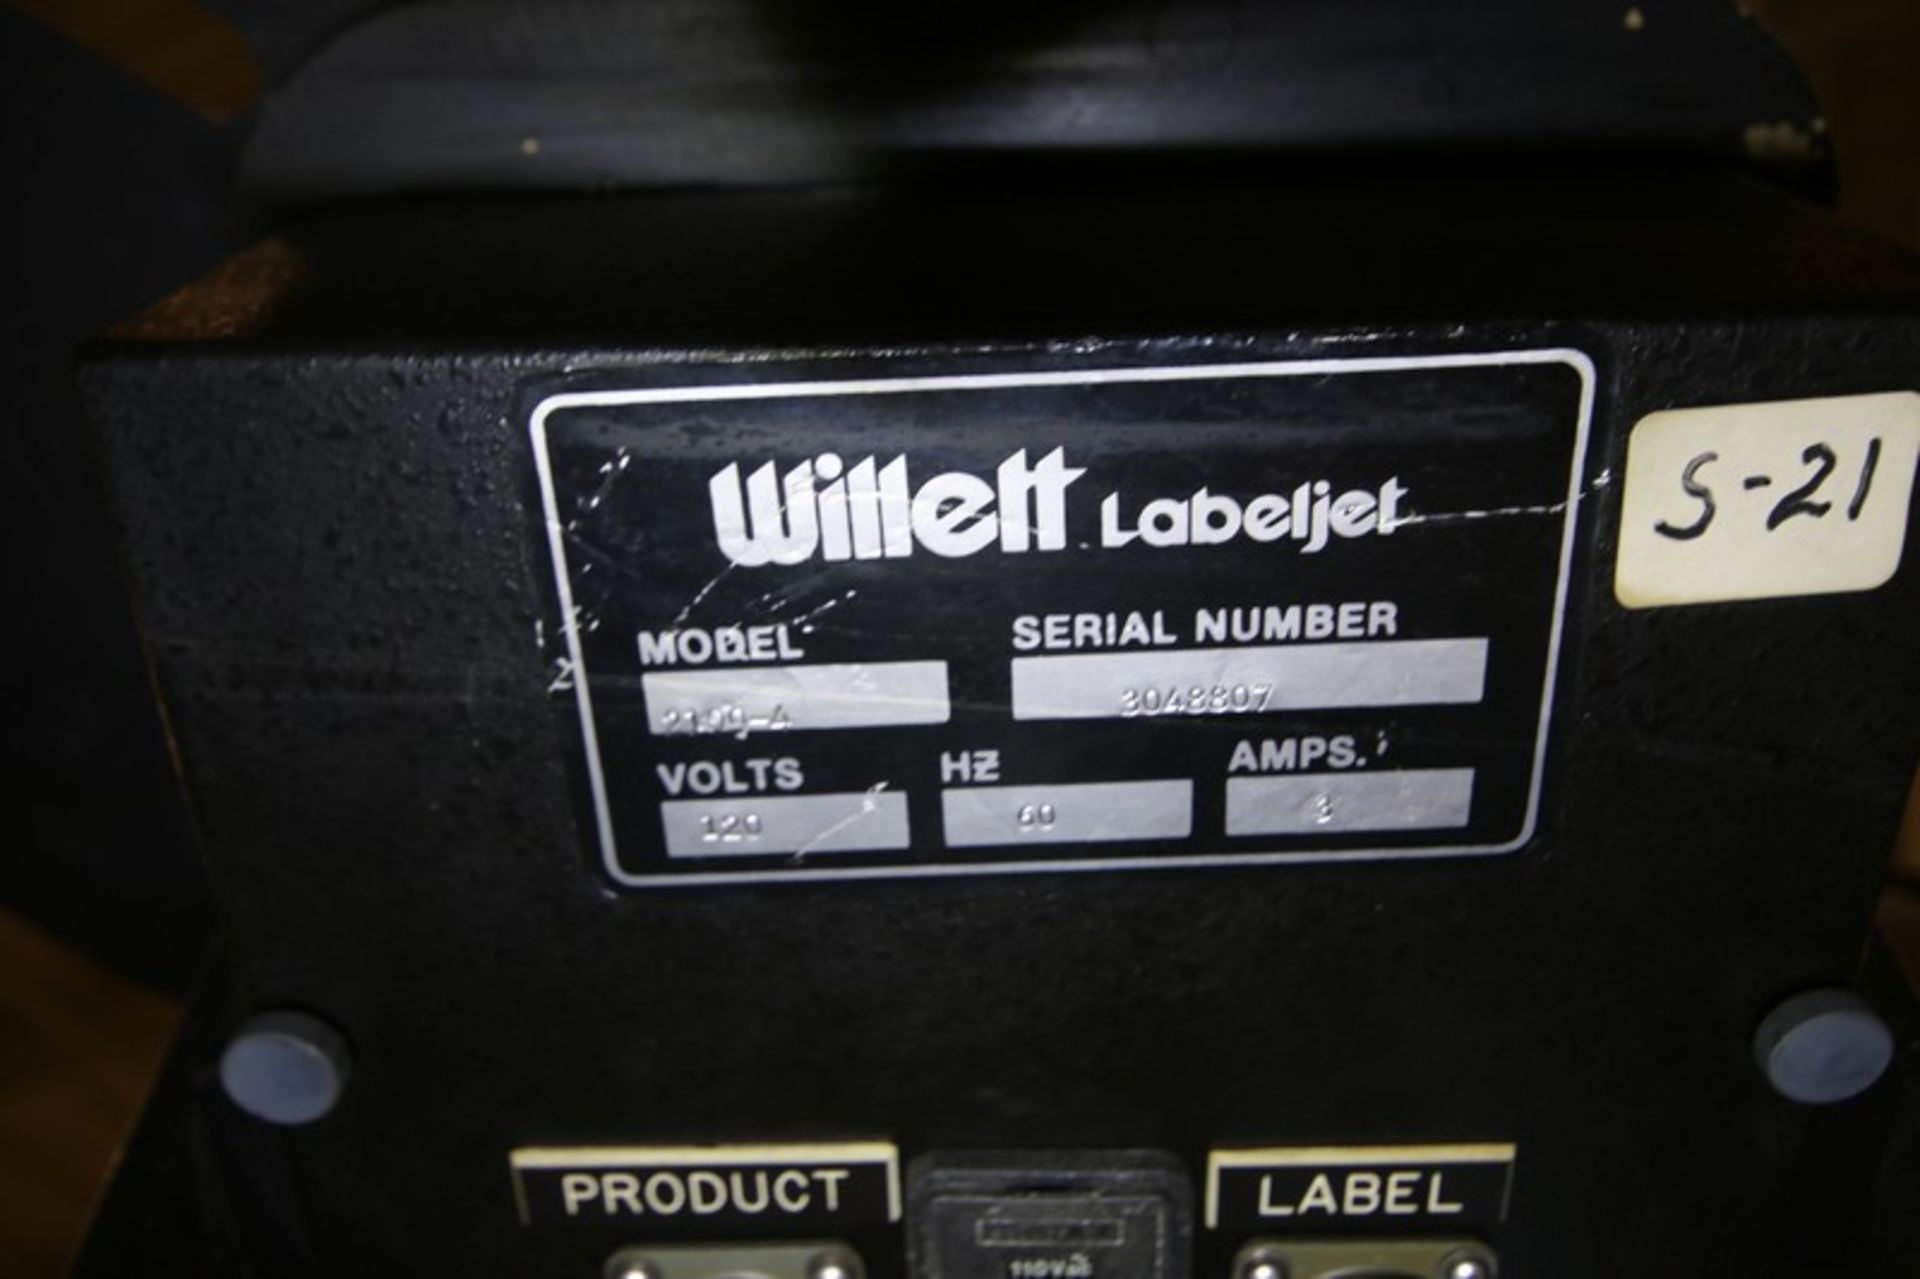 Willet Labeljet Portable Labeler with (2) Heads, Model 2100-4, SN 3048807 & 3058807, with 10' L x - Image 5 of 10